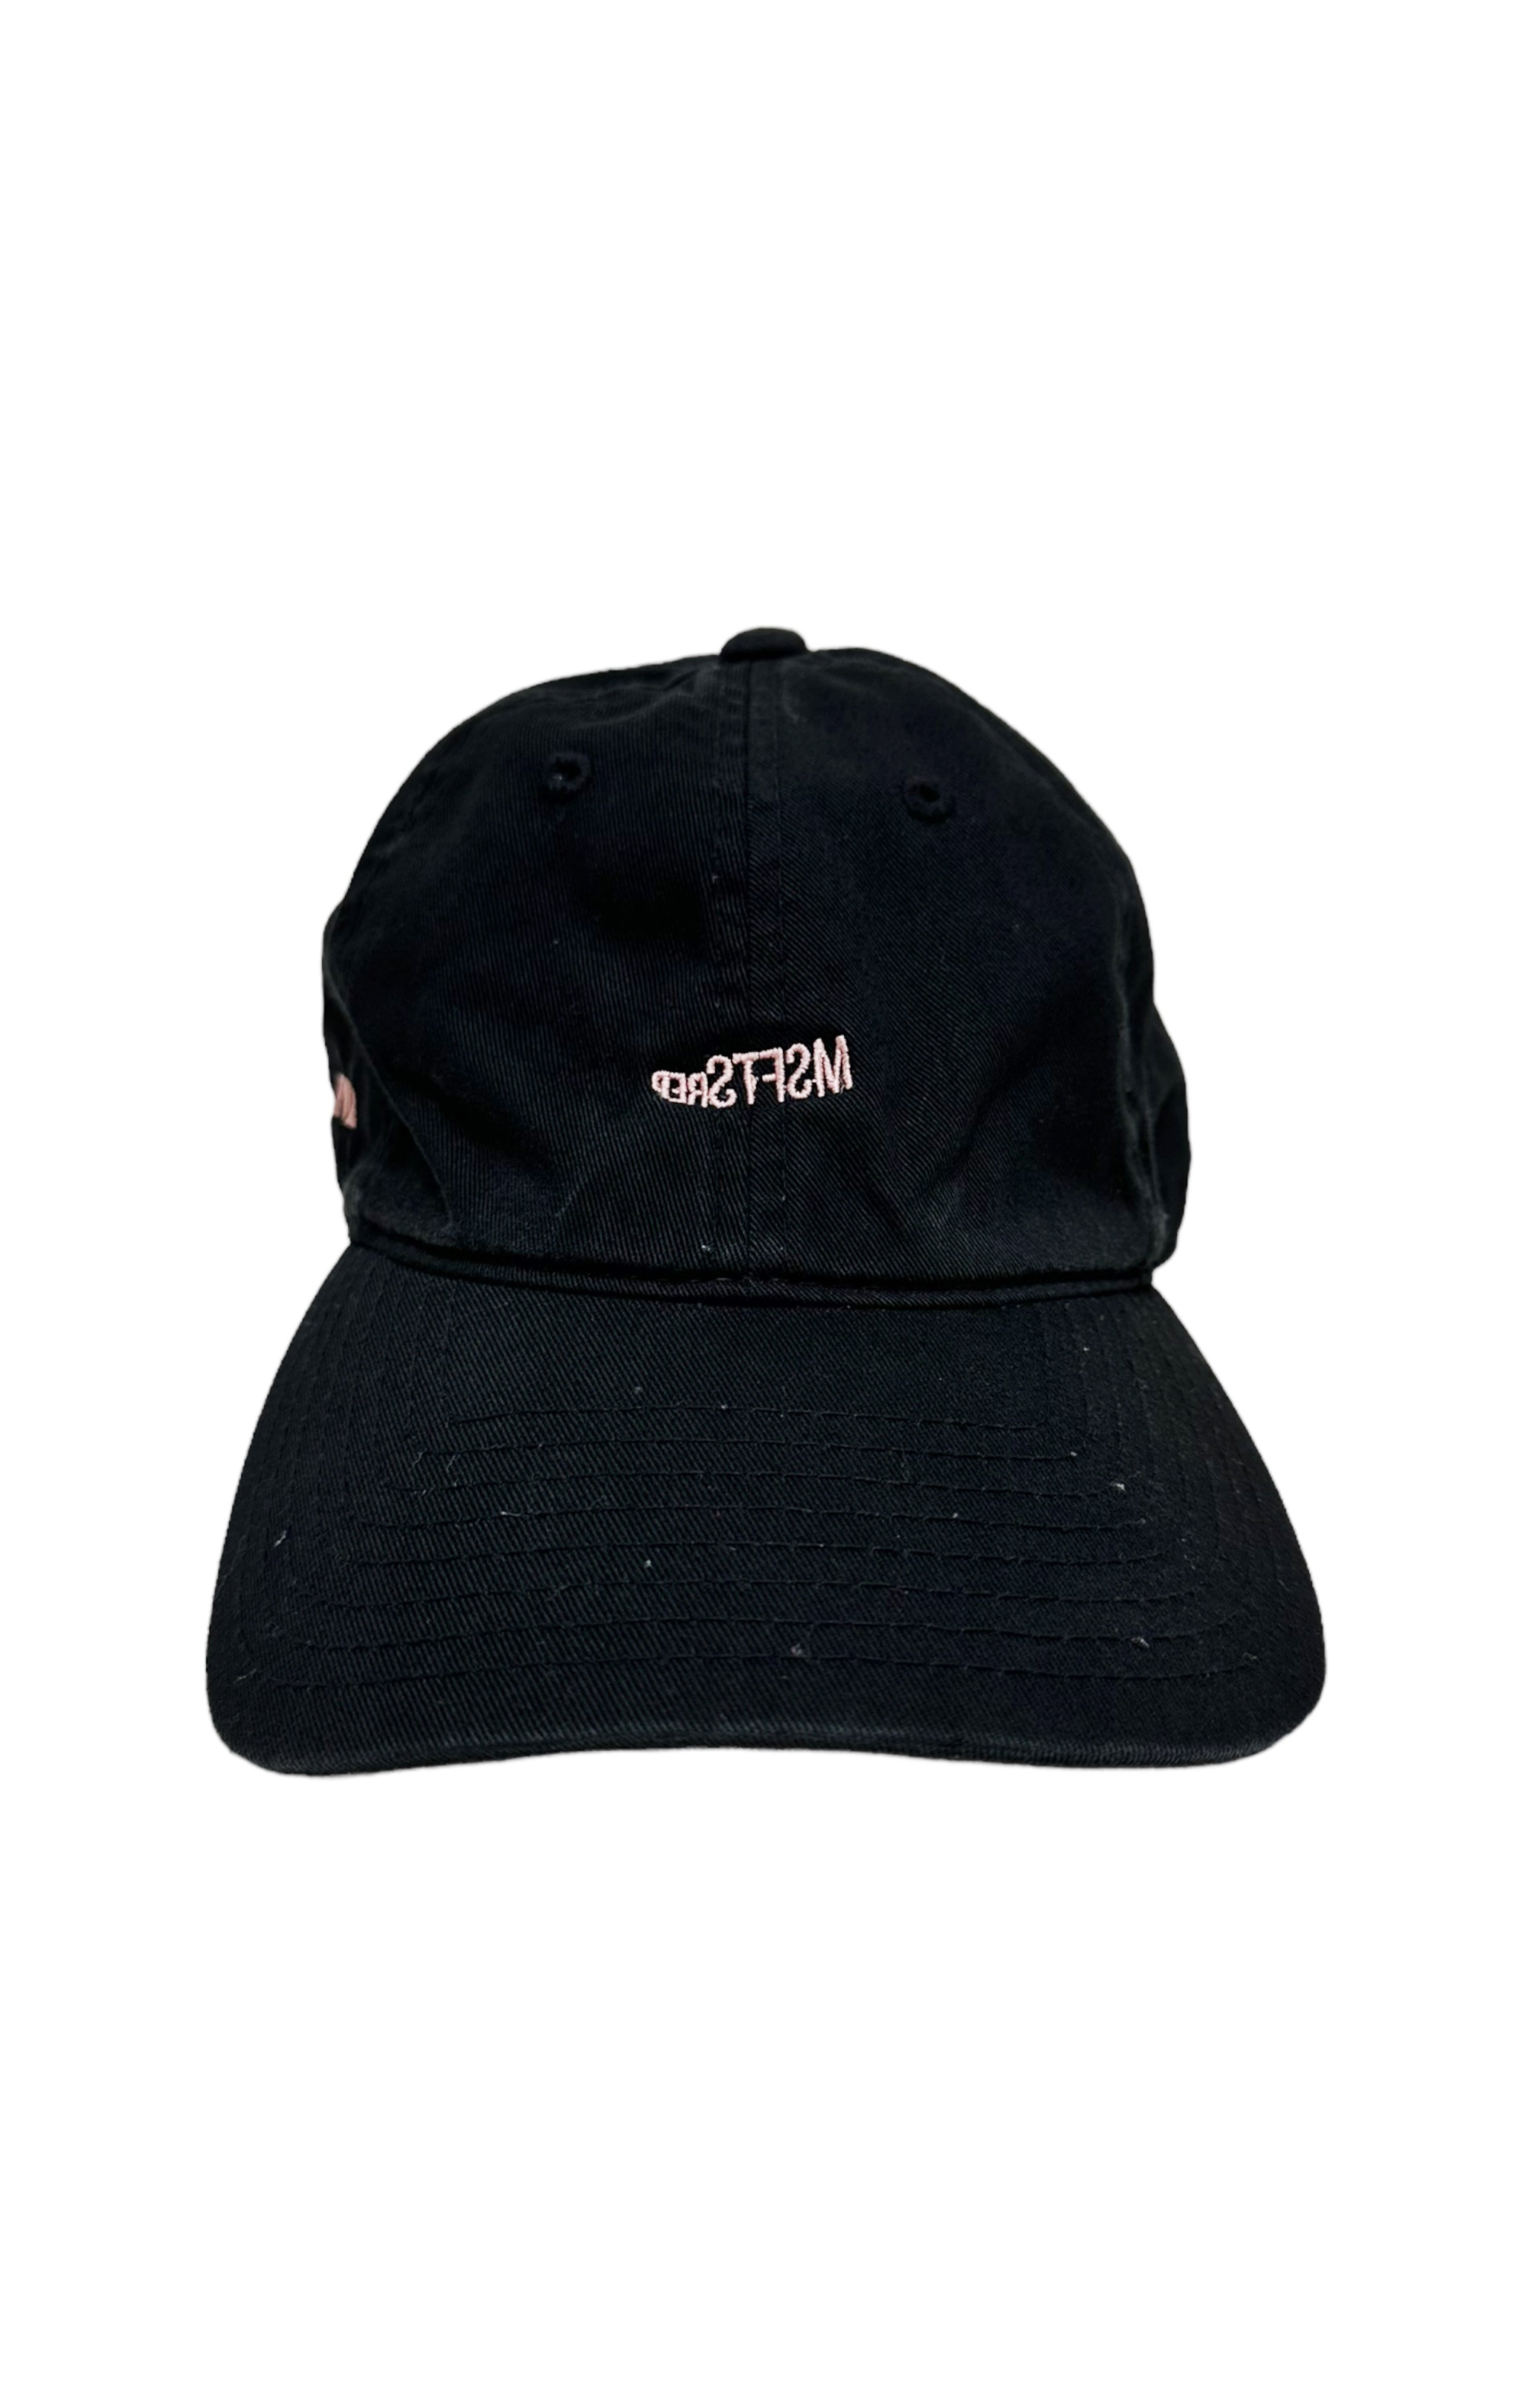 MSFTSREP (RARE) Hat Size: No size tags, fits like S